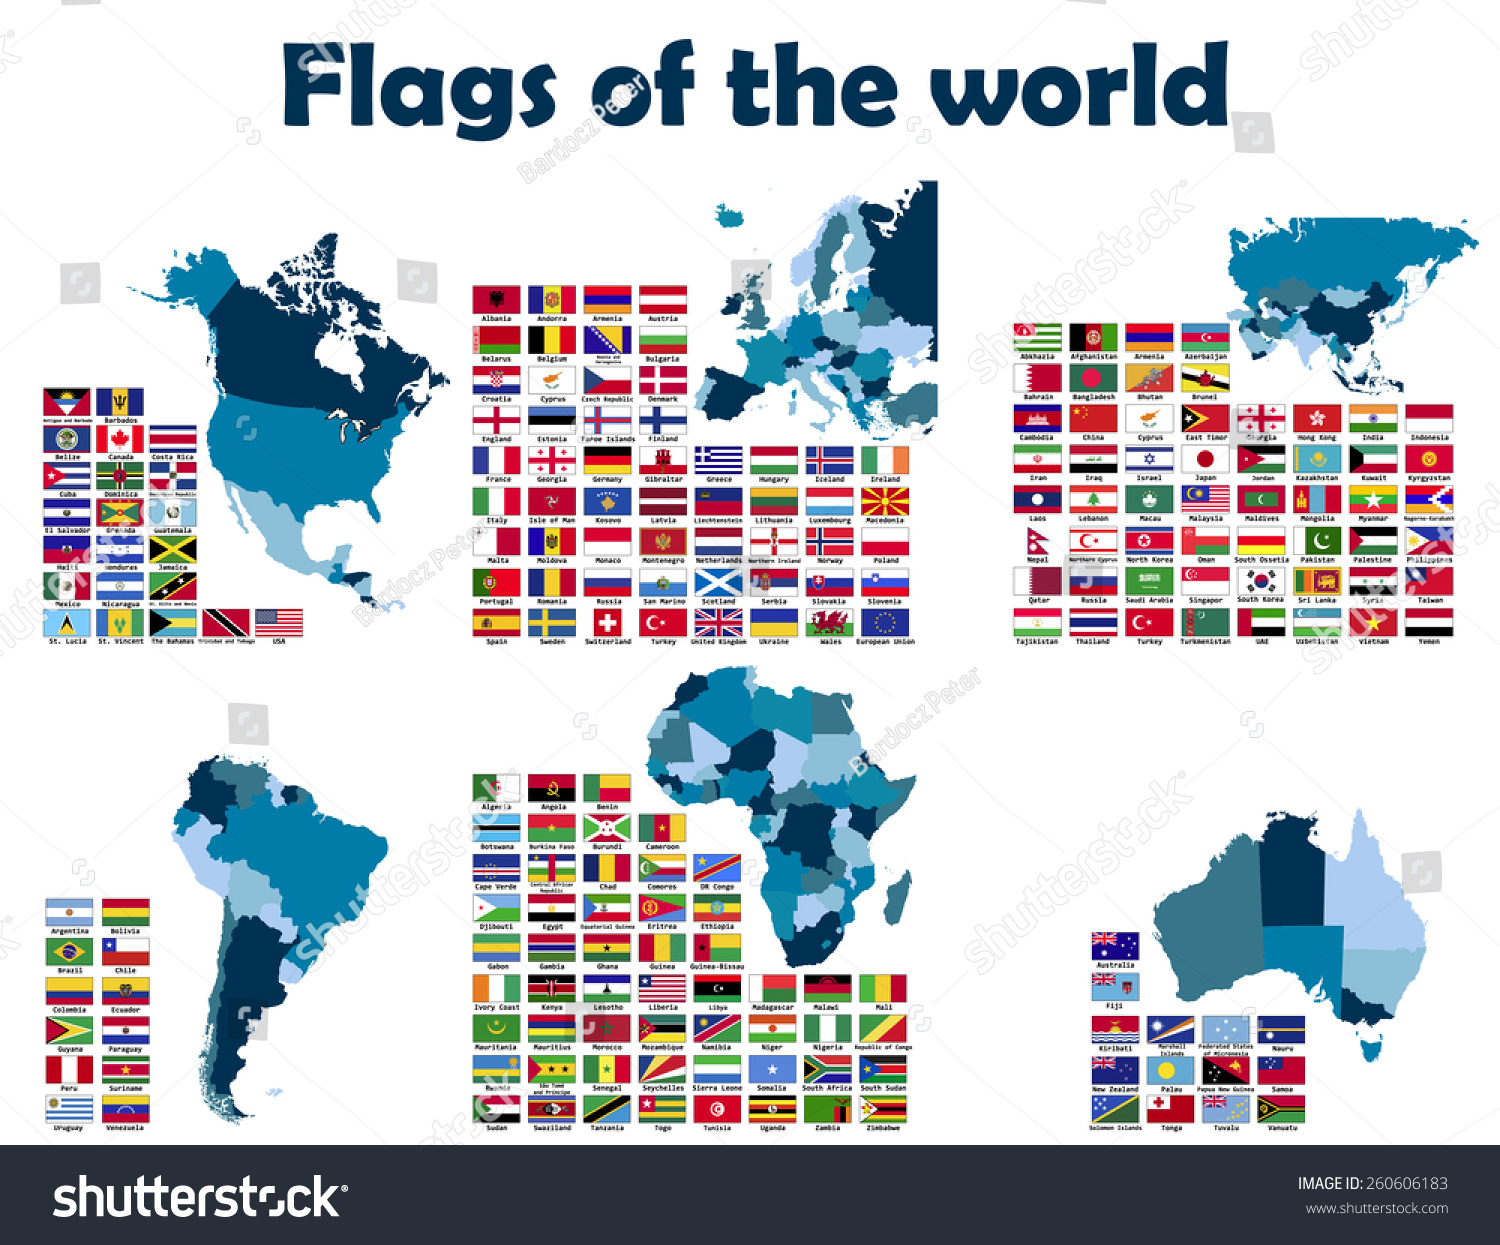 vektor-stok-flags-world-sorted-by-continents-alphabetically-tanpa